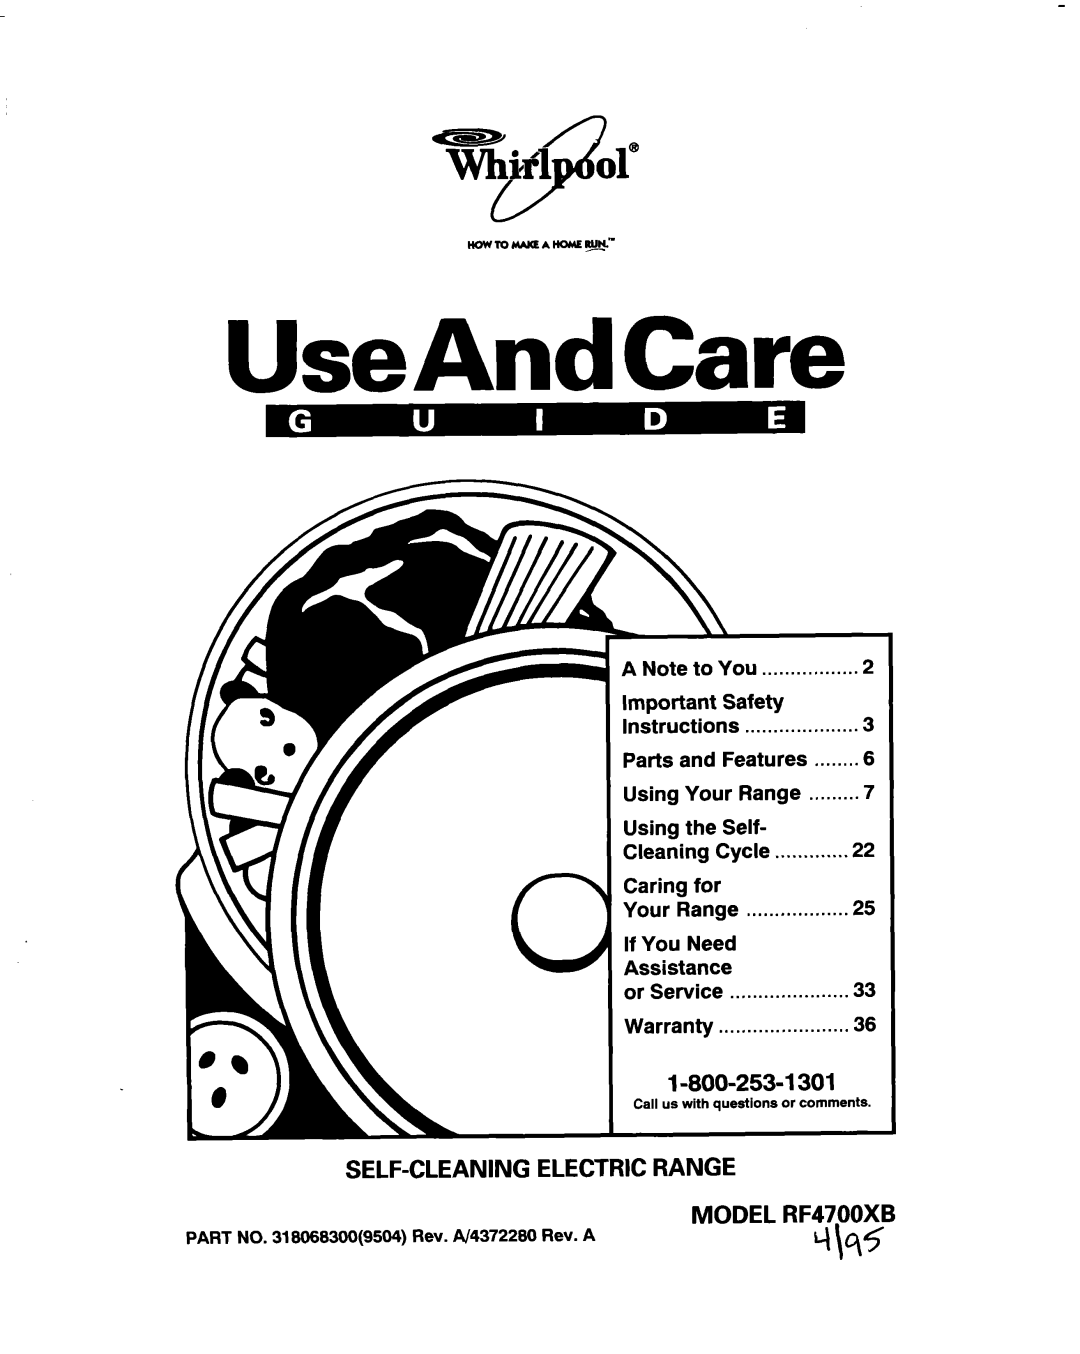 Whirlpool important safety instructions UseAndCare, SELF-CLEANINGELECTRIC RANGE MODEL RF4700XB 